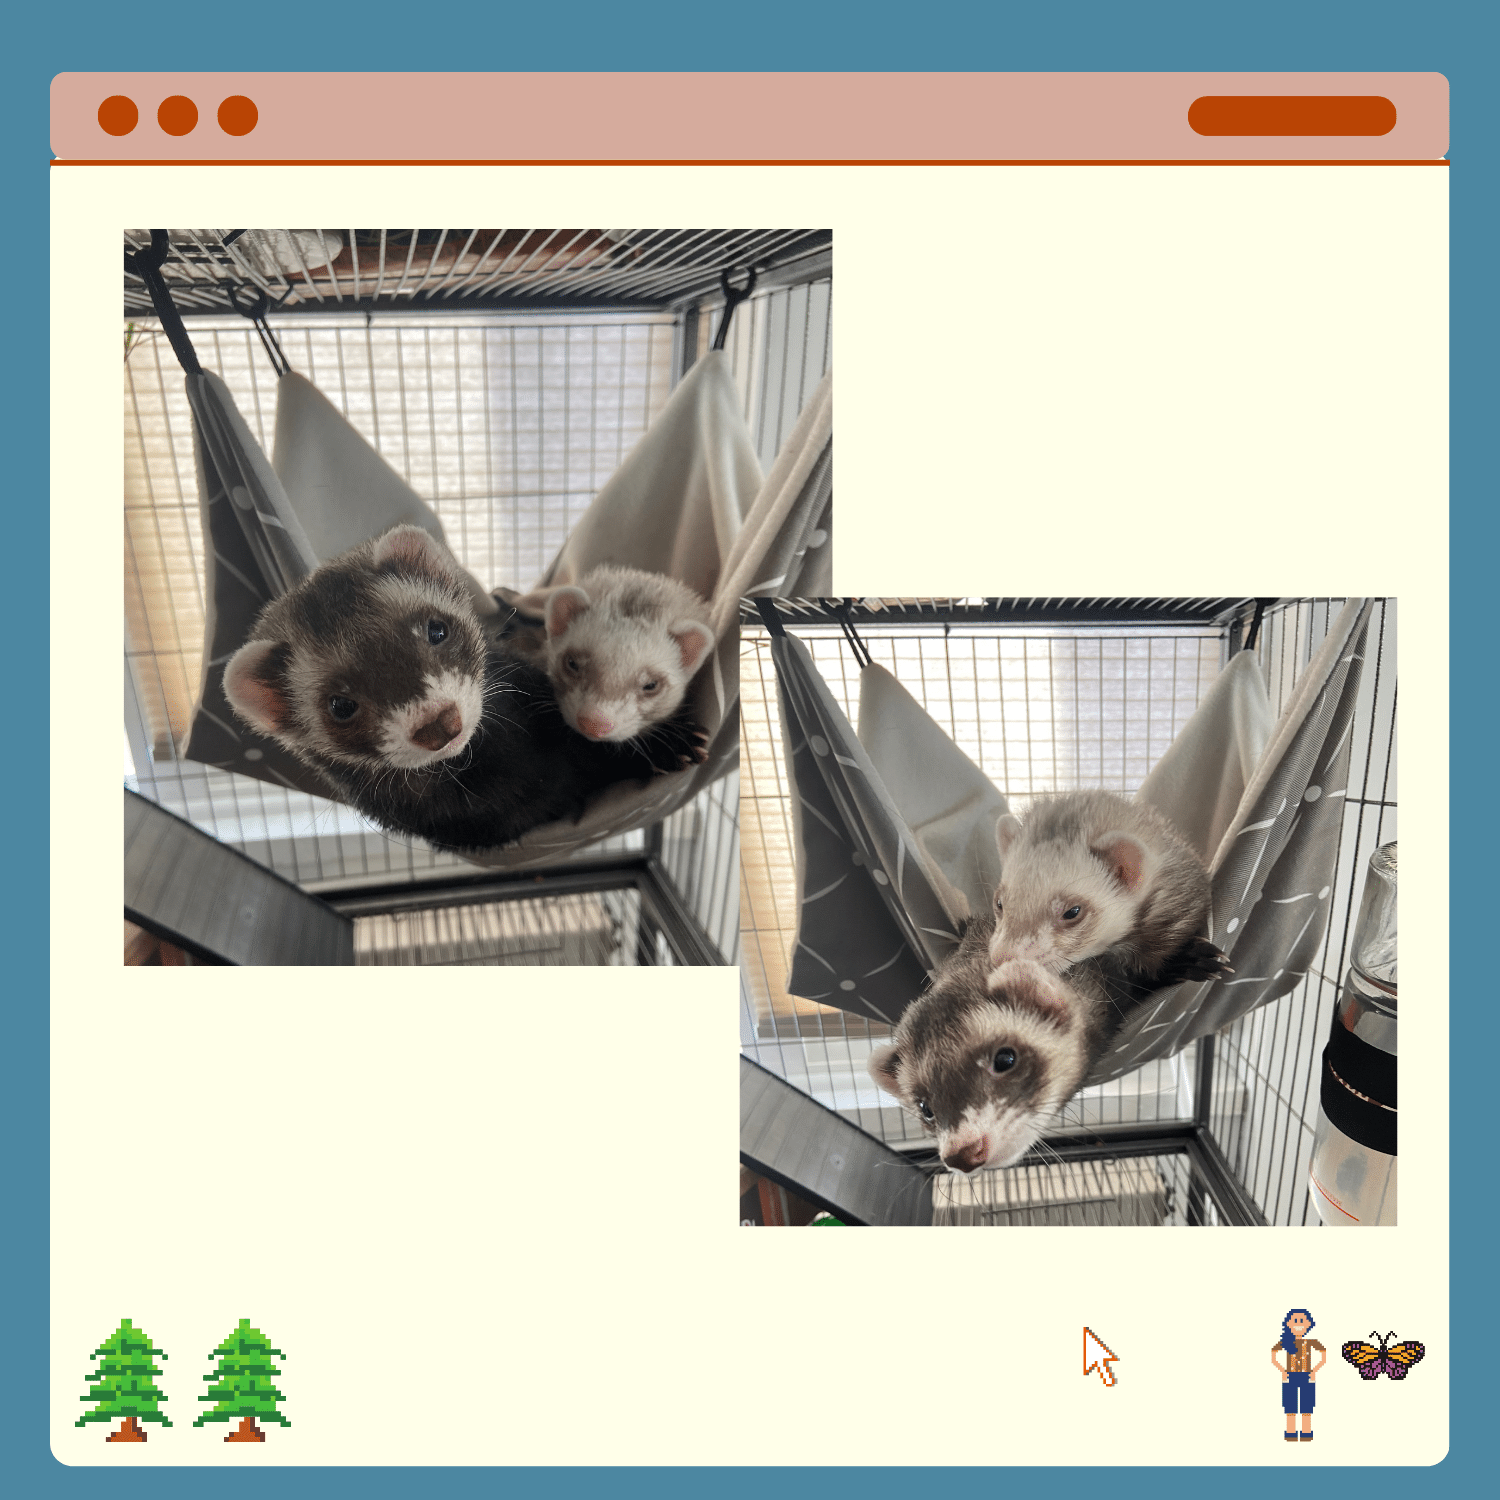 Pictures of two ferrets